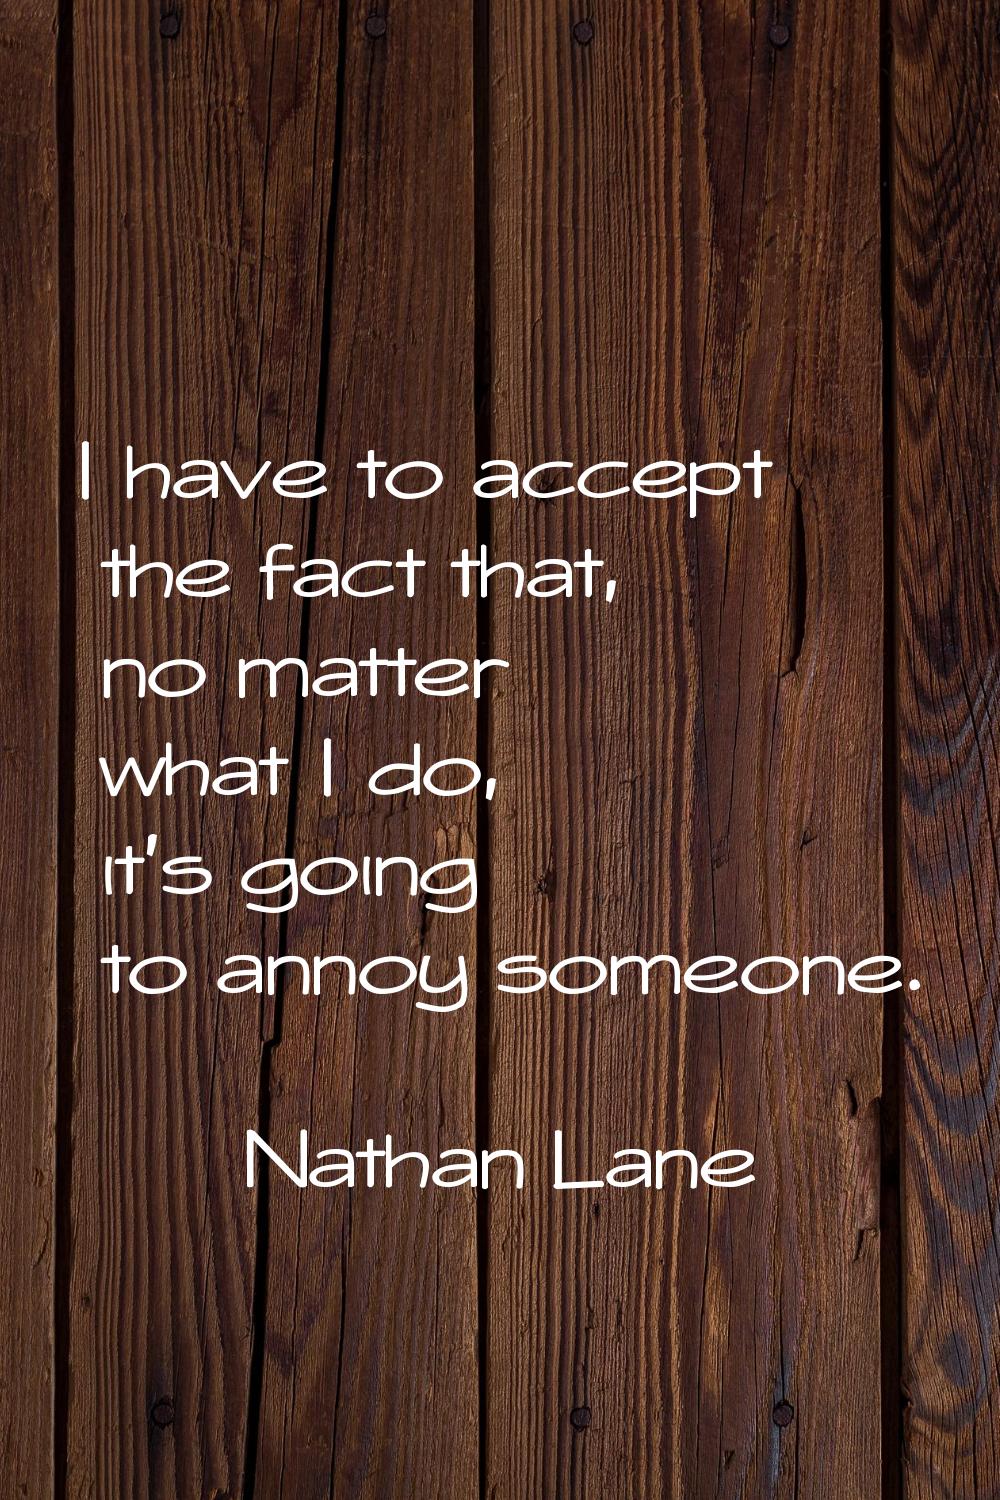 I have to accept the fact that, no matter what I do, it's going to annoy someone.